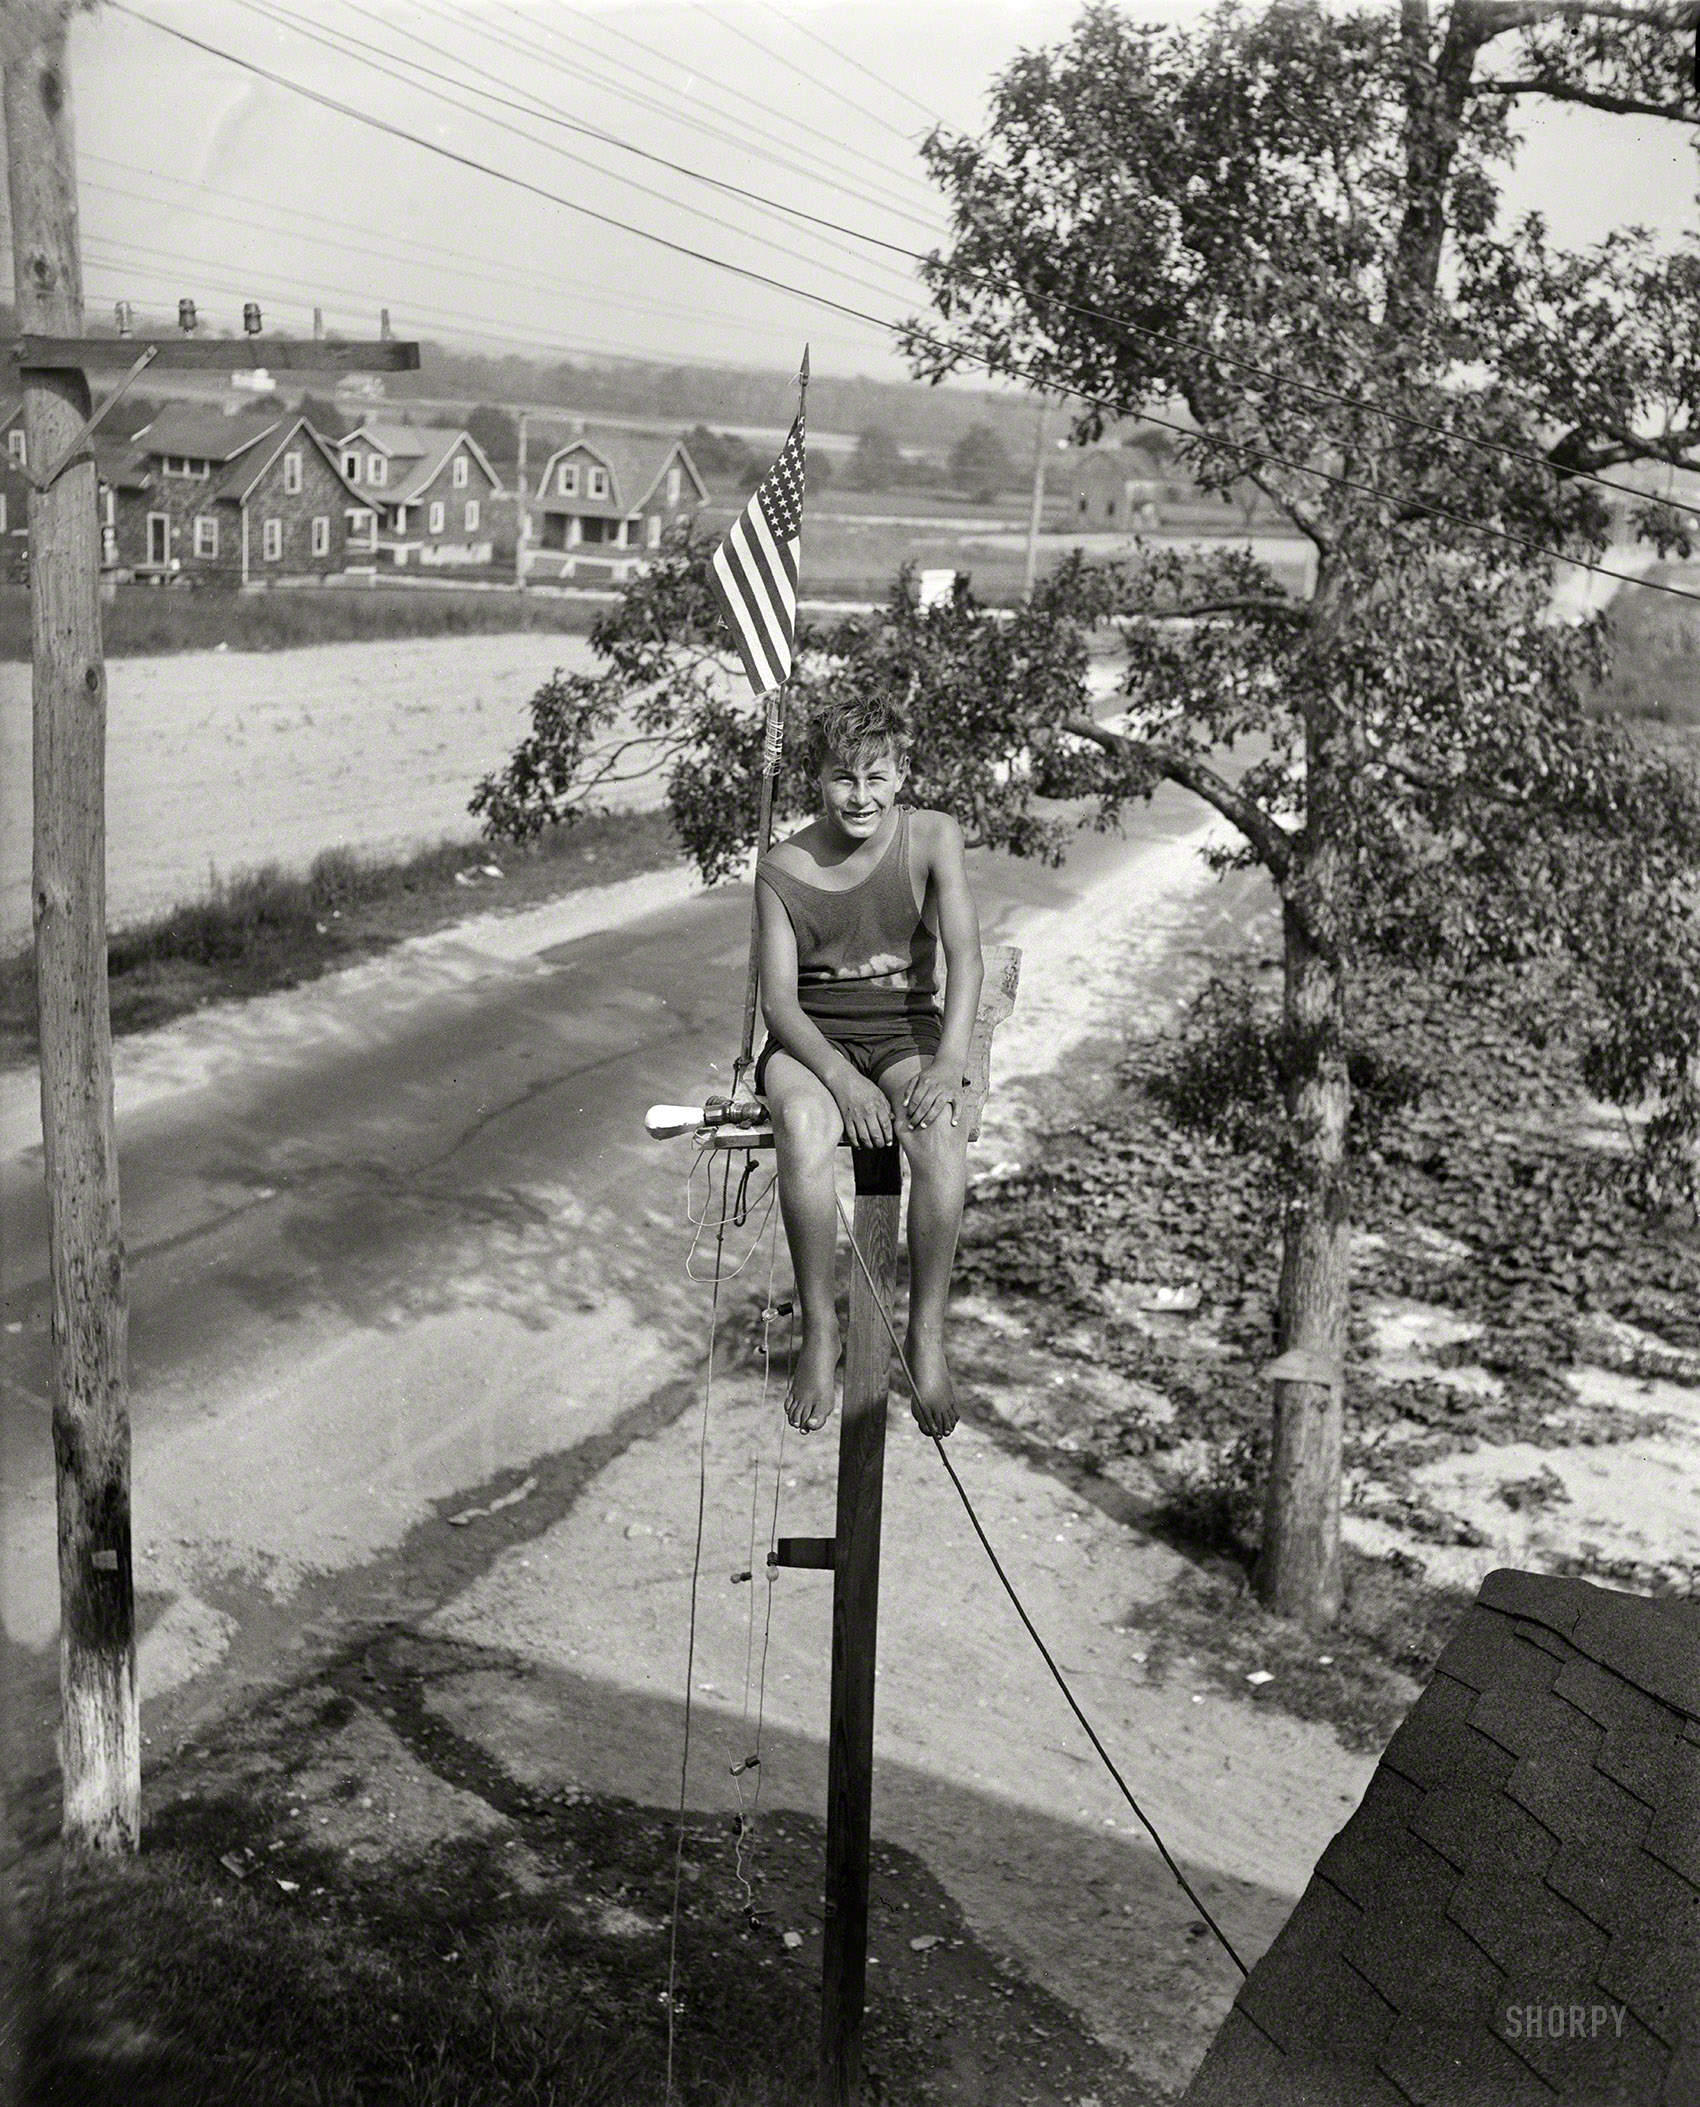 UPDATE: The Library of Congress has given this photo a caption.

September 3, 1929. "Maryland youth breaks pole sitting record. William Ruppert, 14-year-old youth of Colgate, Maryland, as he appeared atop the flagpole in the yard of his home yesterday after breaking the pole sitting record of 23 days set by Shipwreck Kelly. Young Ruppert, who started his sitting on August 1, has worn out three pairs of trousers so far. He says he expects to stay up 30 days more. The pole is 18 feet high." Note the light bulb rigged to the seat. View full size.